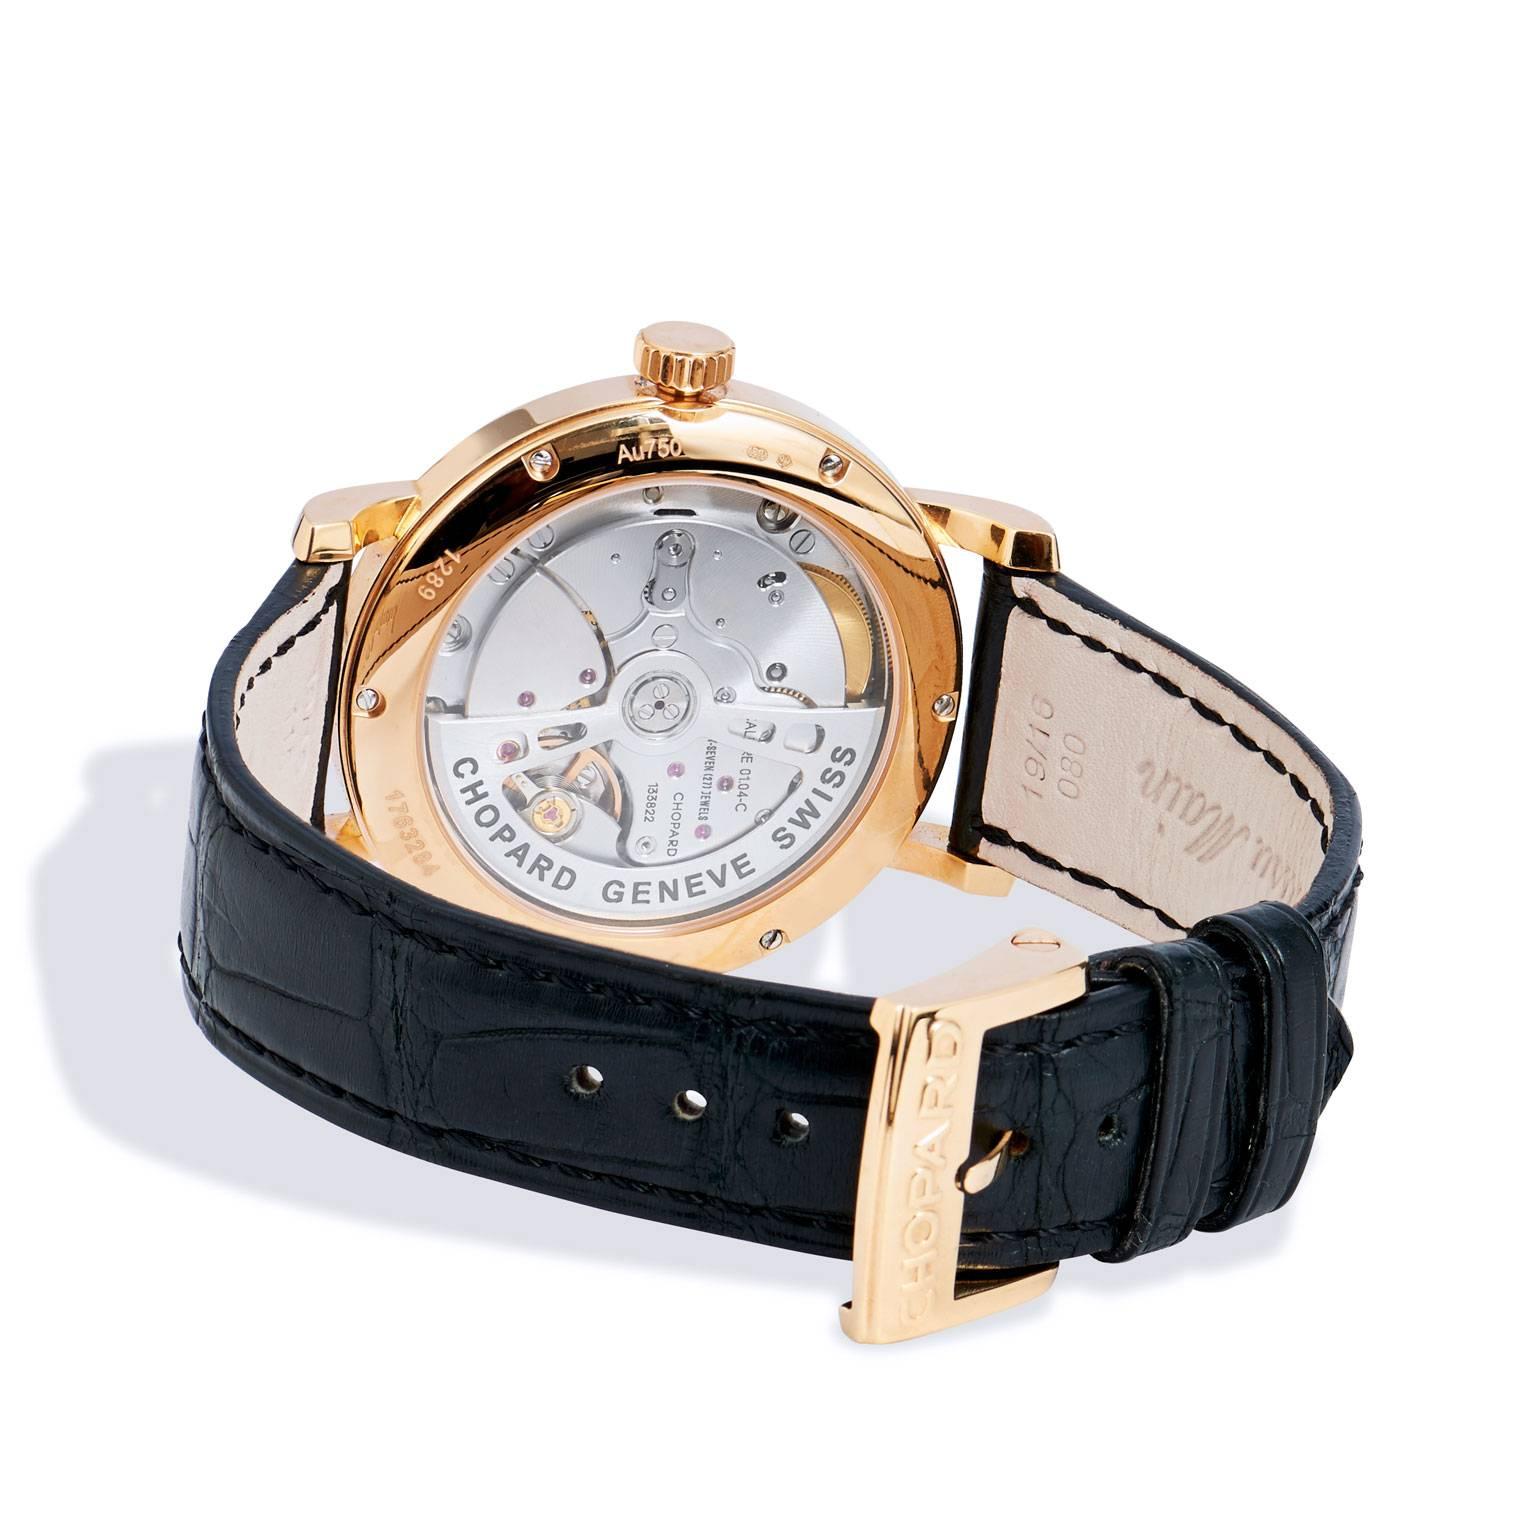 Men's Chopard 18 Karat Gold Classic White Dial Power Reserve 38 MM Watch

18 karat rose gold highlights the traditional craftsmanship representative of the Chopard brand in this classic automatic 38 MM watch with power reserve. Stately Roman